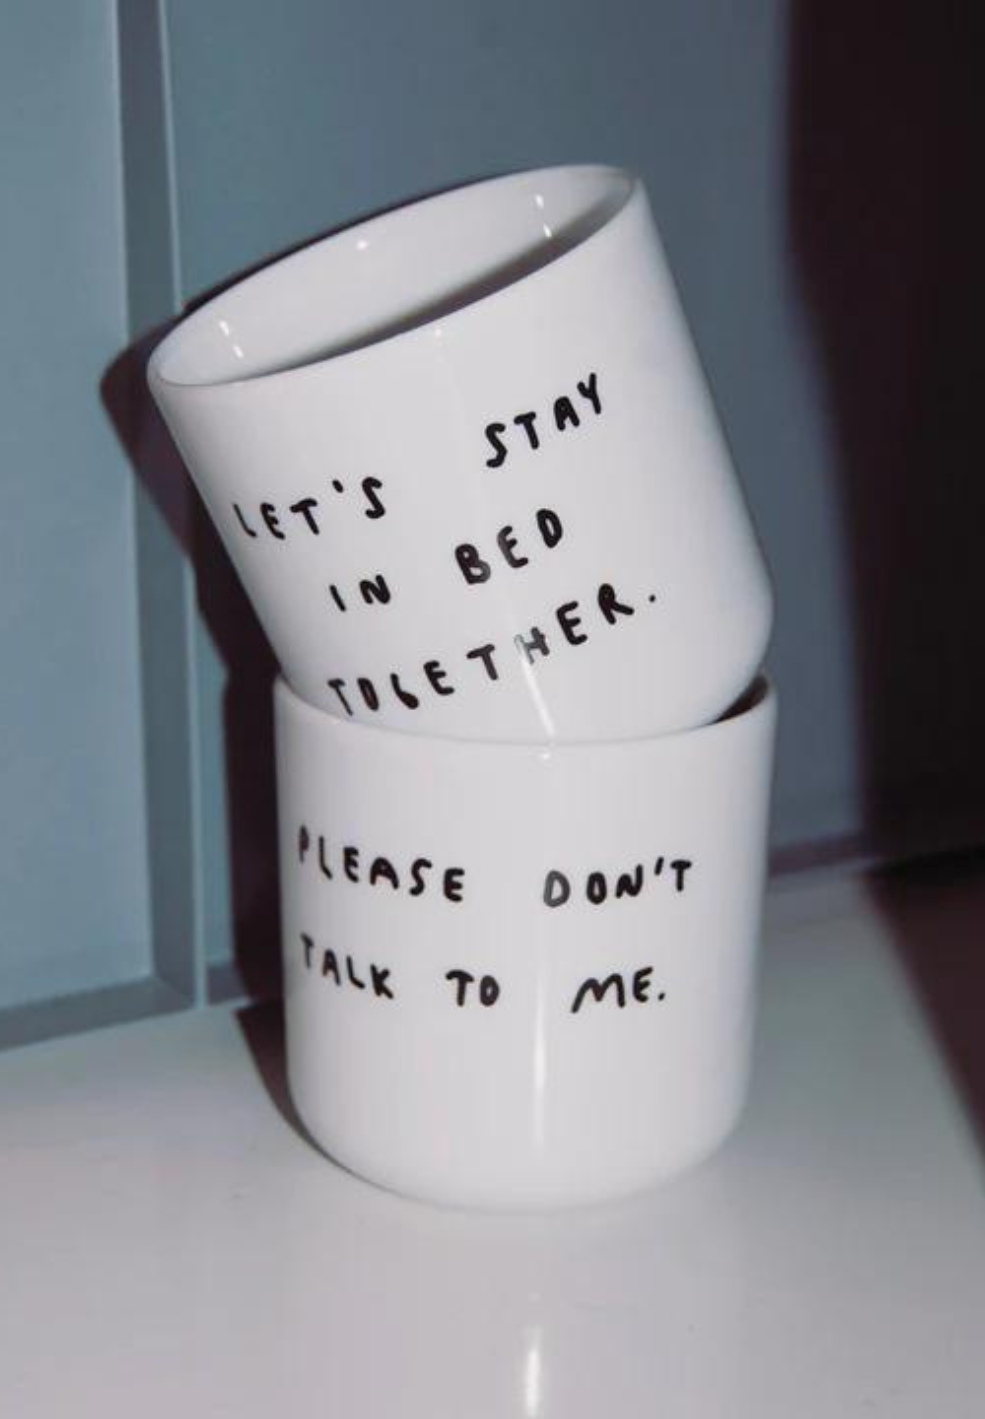 Please Don't Talk To Me Cup